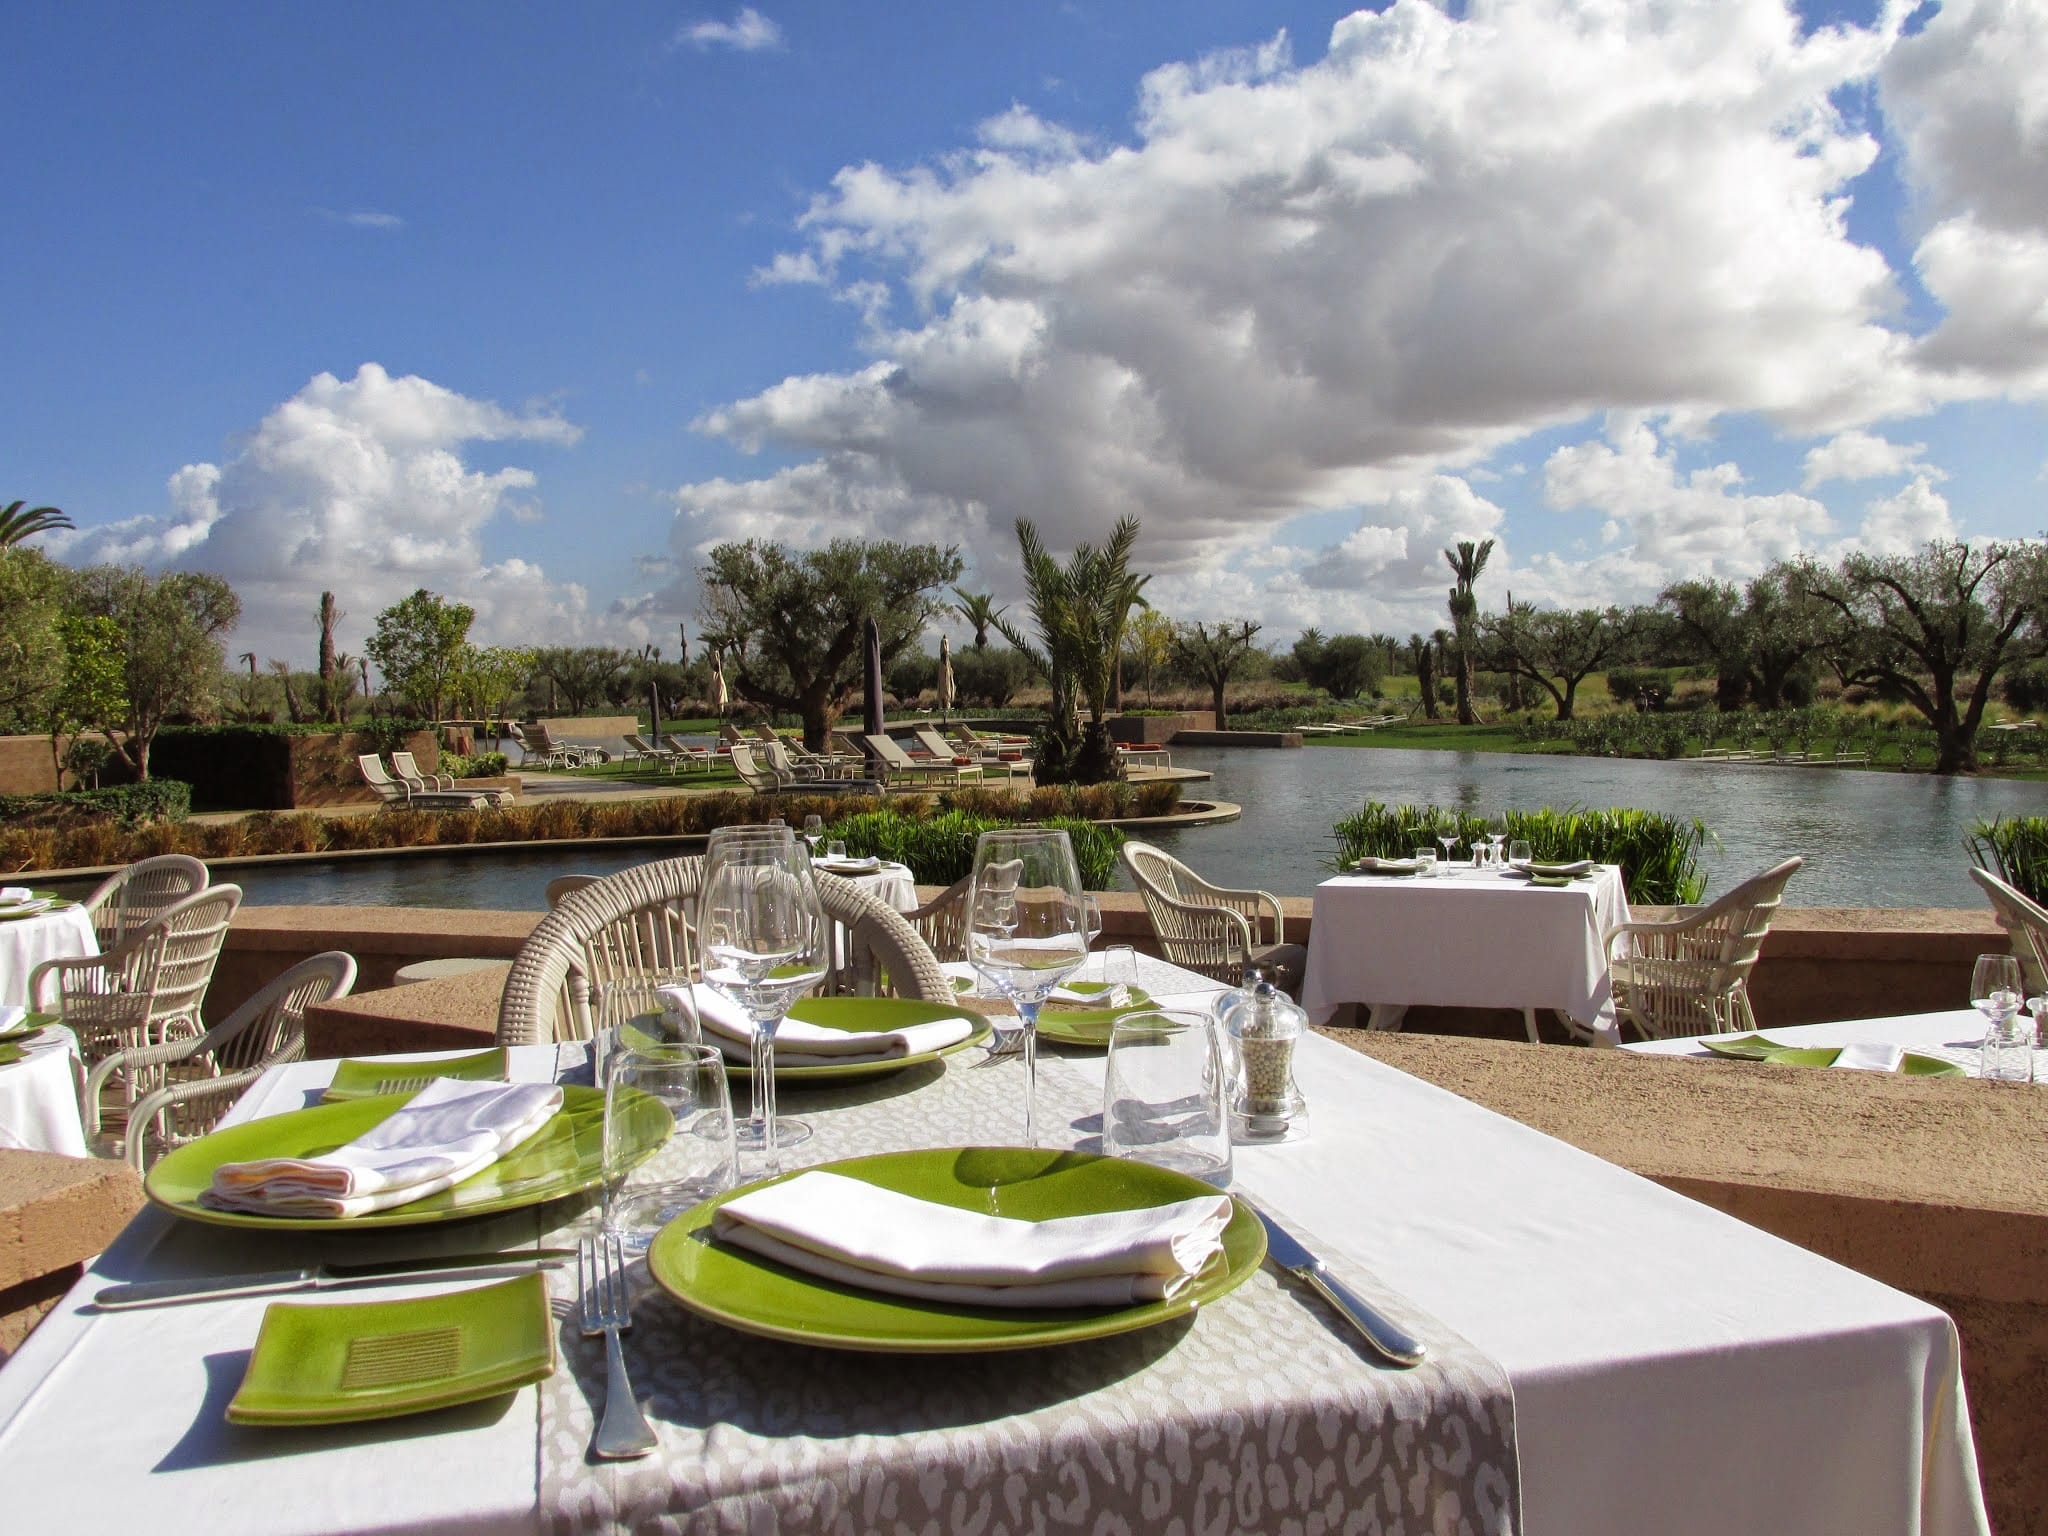 Fairmont Royal Palm Marrakech - Breakfast with a View